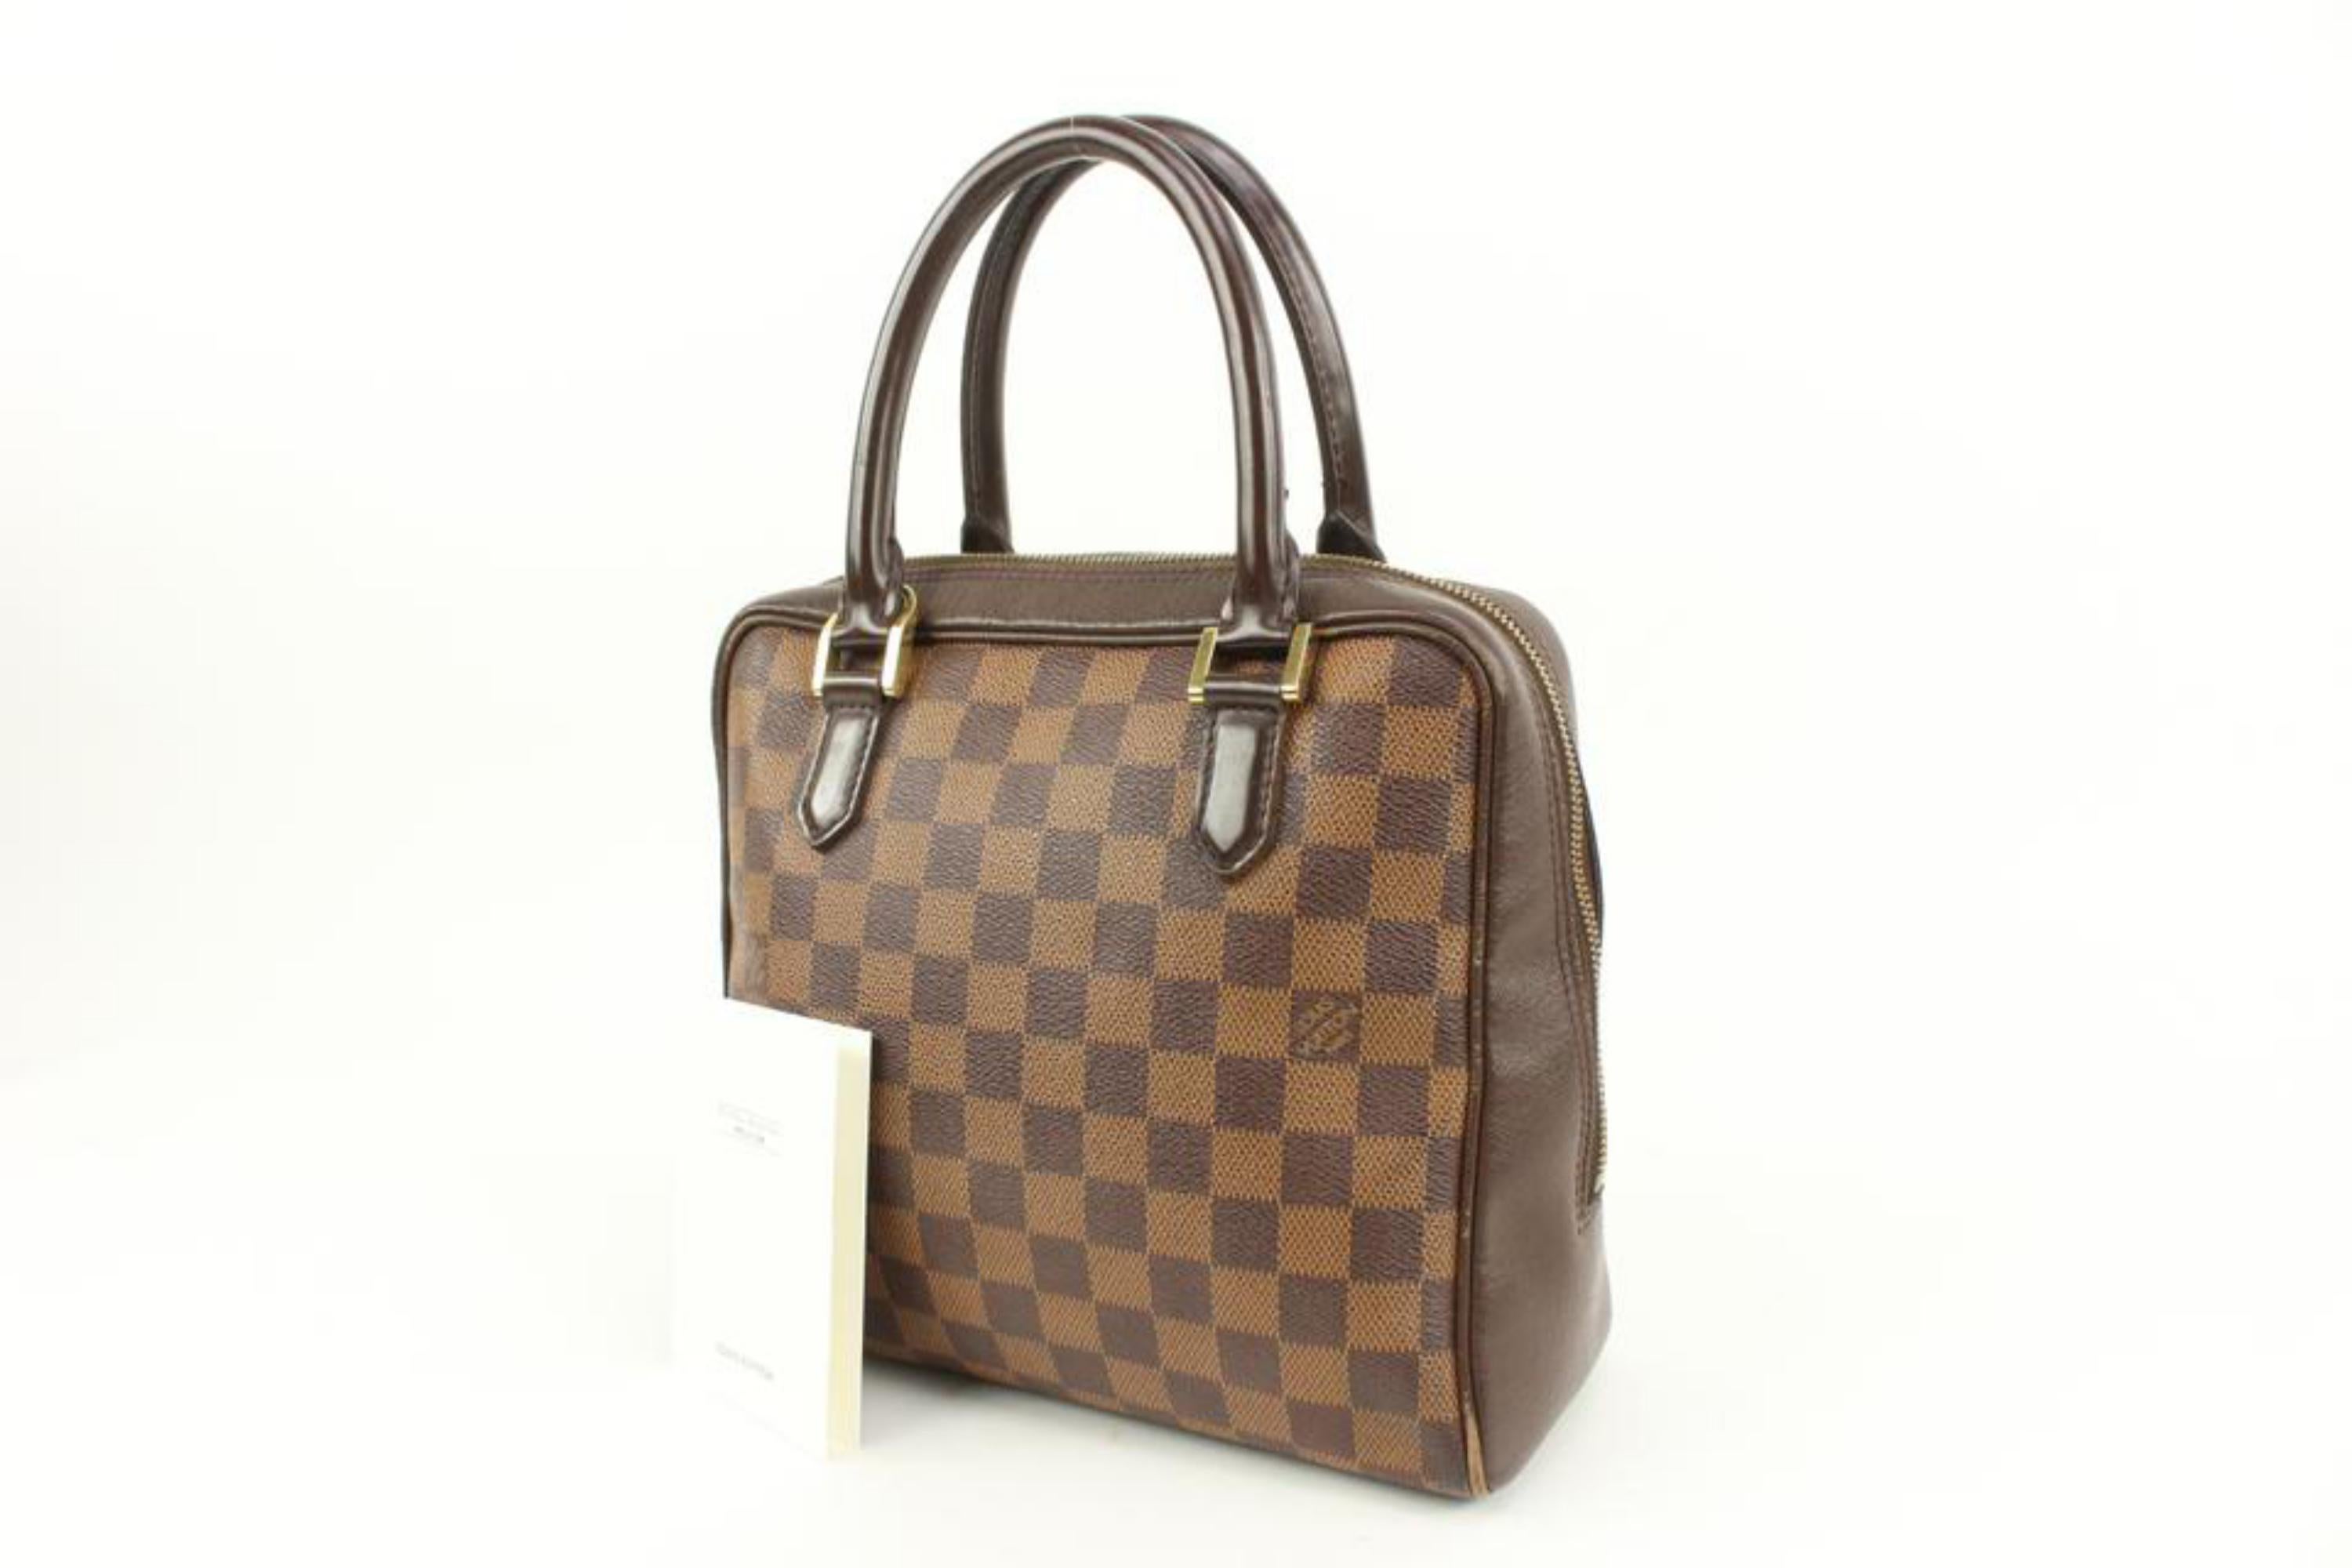 Louis Vuitton Discontinued Damier Ebene Brera Satchel 59lv38s
Date Code/Serial Number: VI0023
Made In: France
Measurements: Length:  9.5